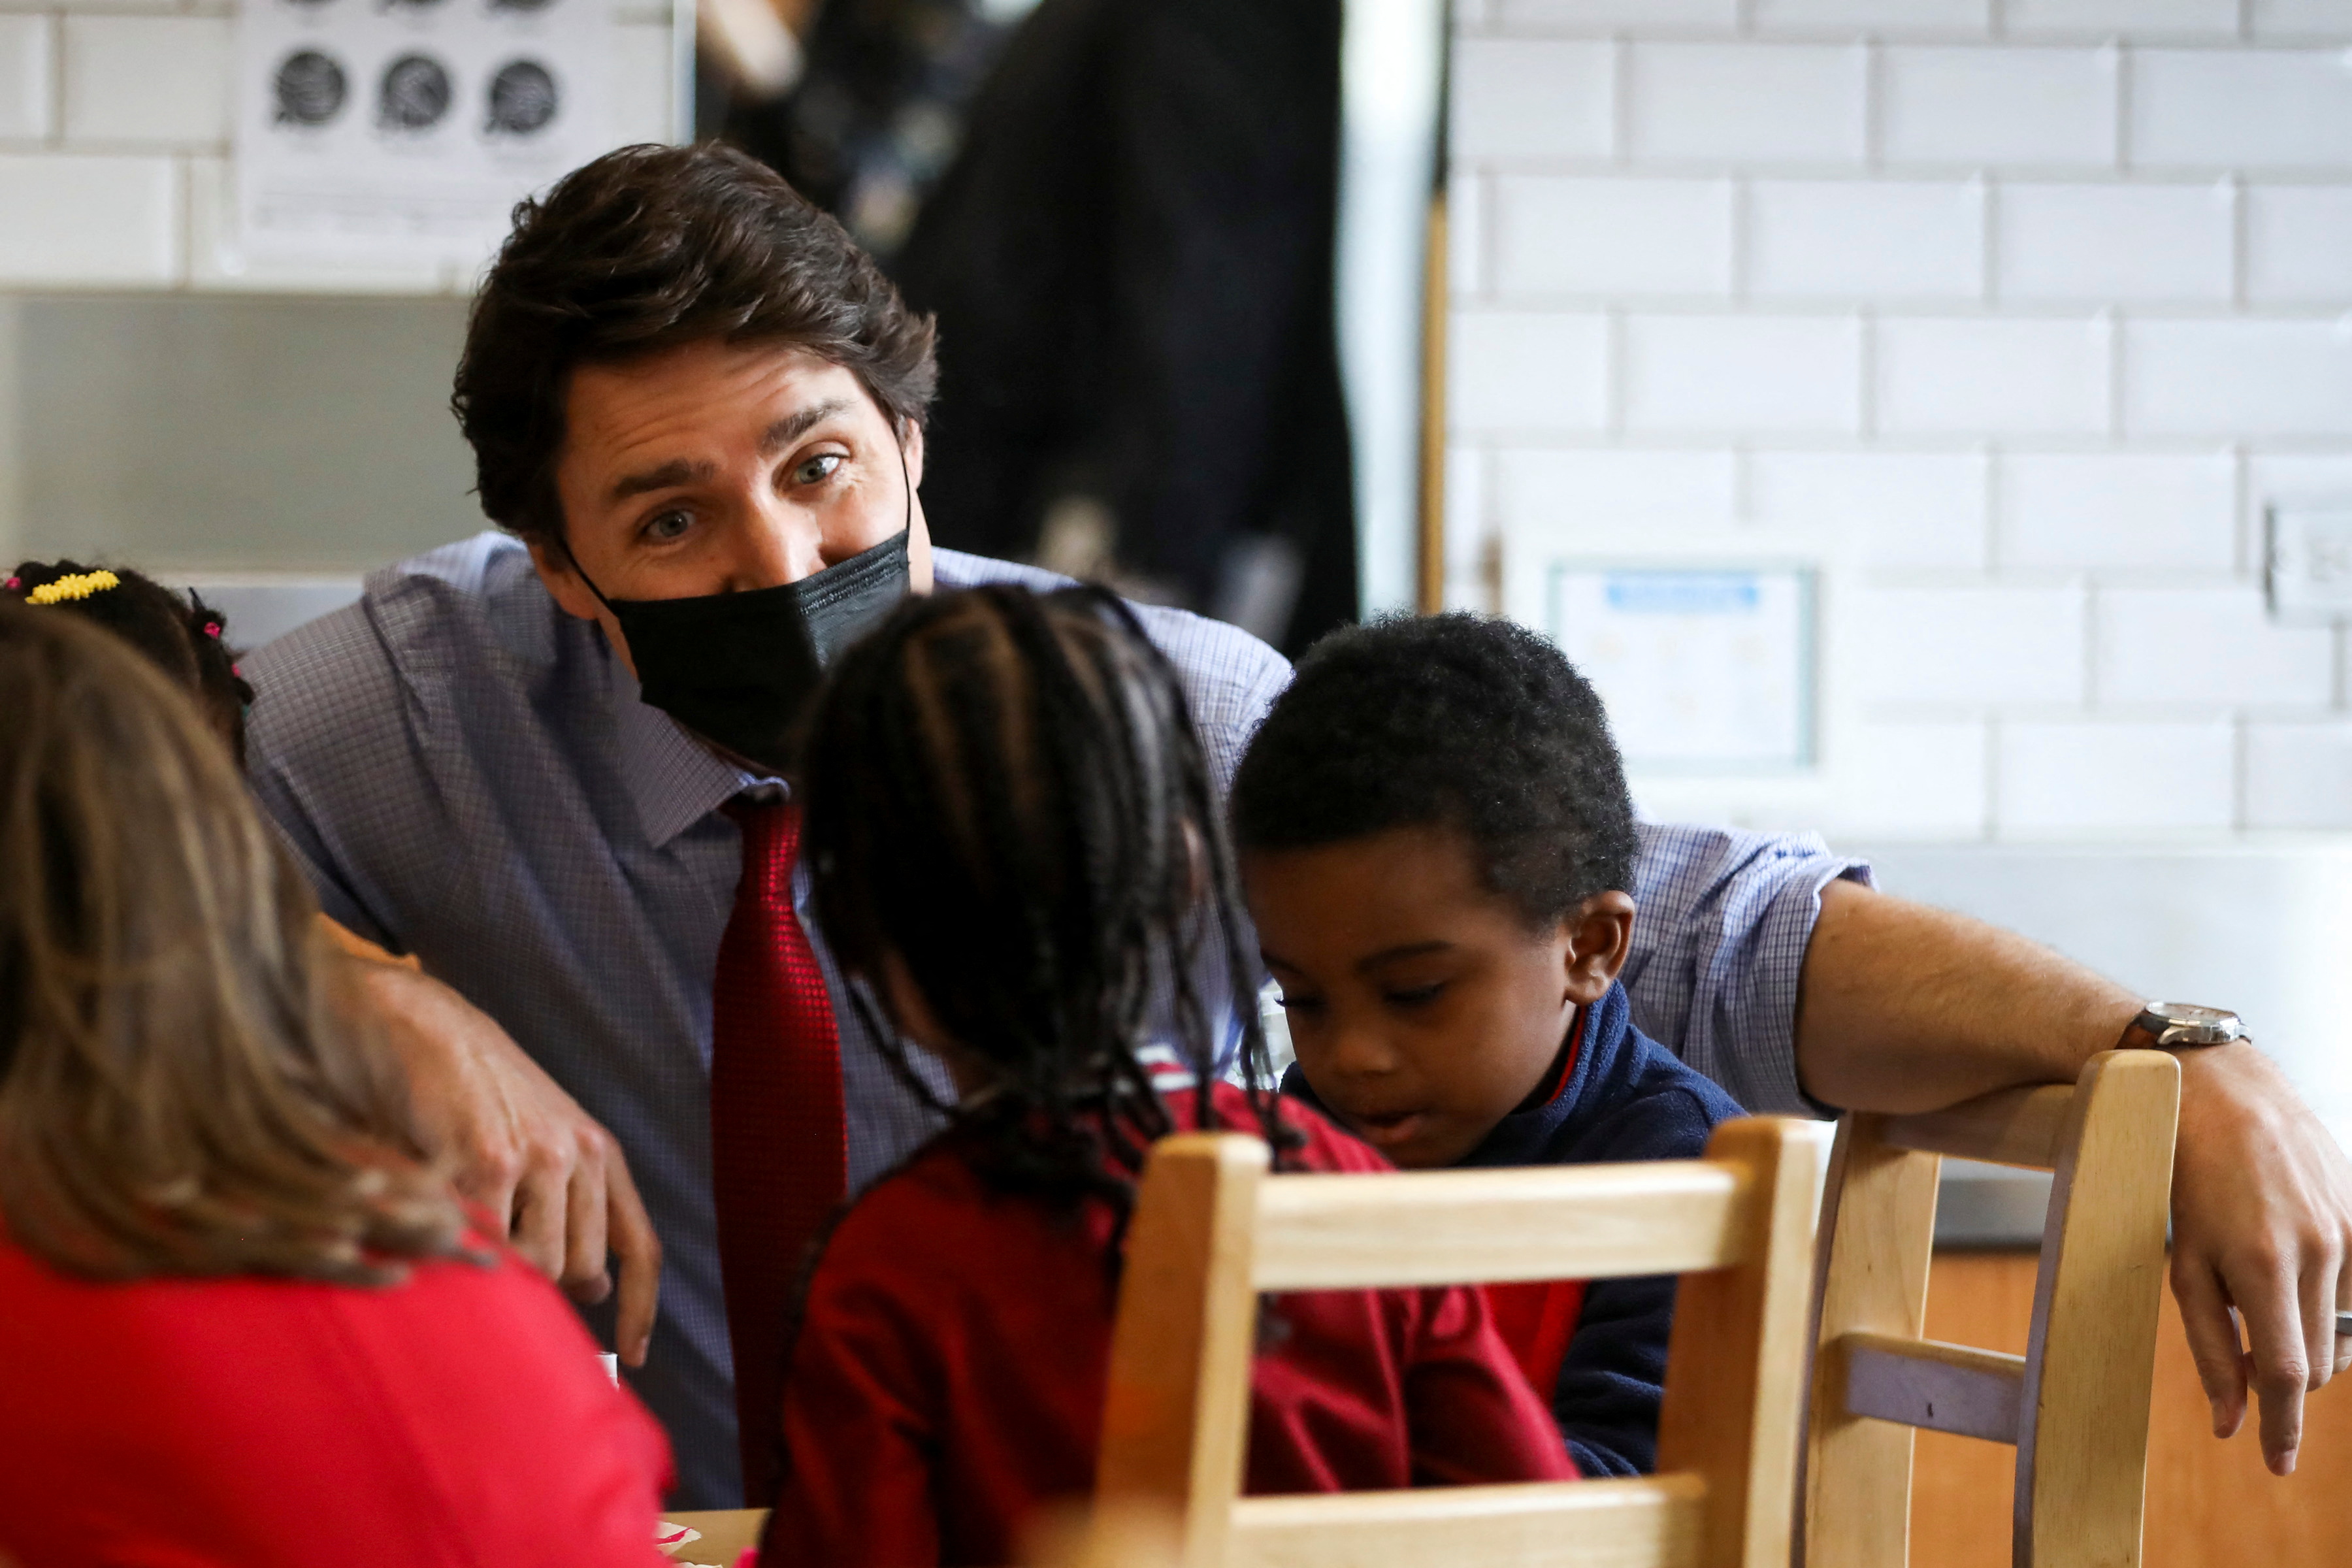 Canada agrees to multi-year daycare deal with Ontario province